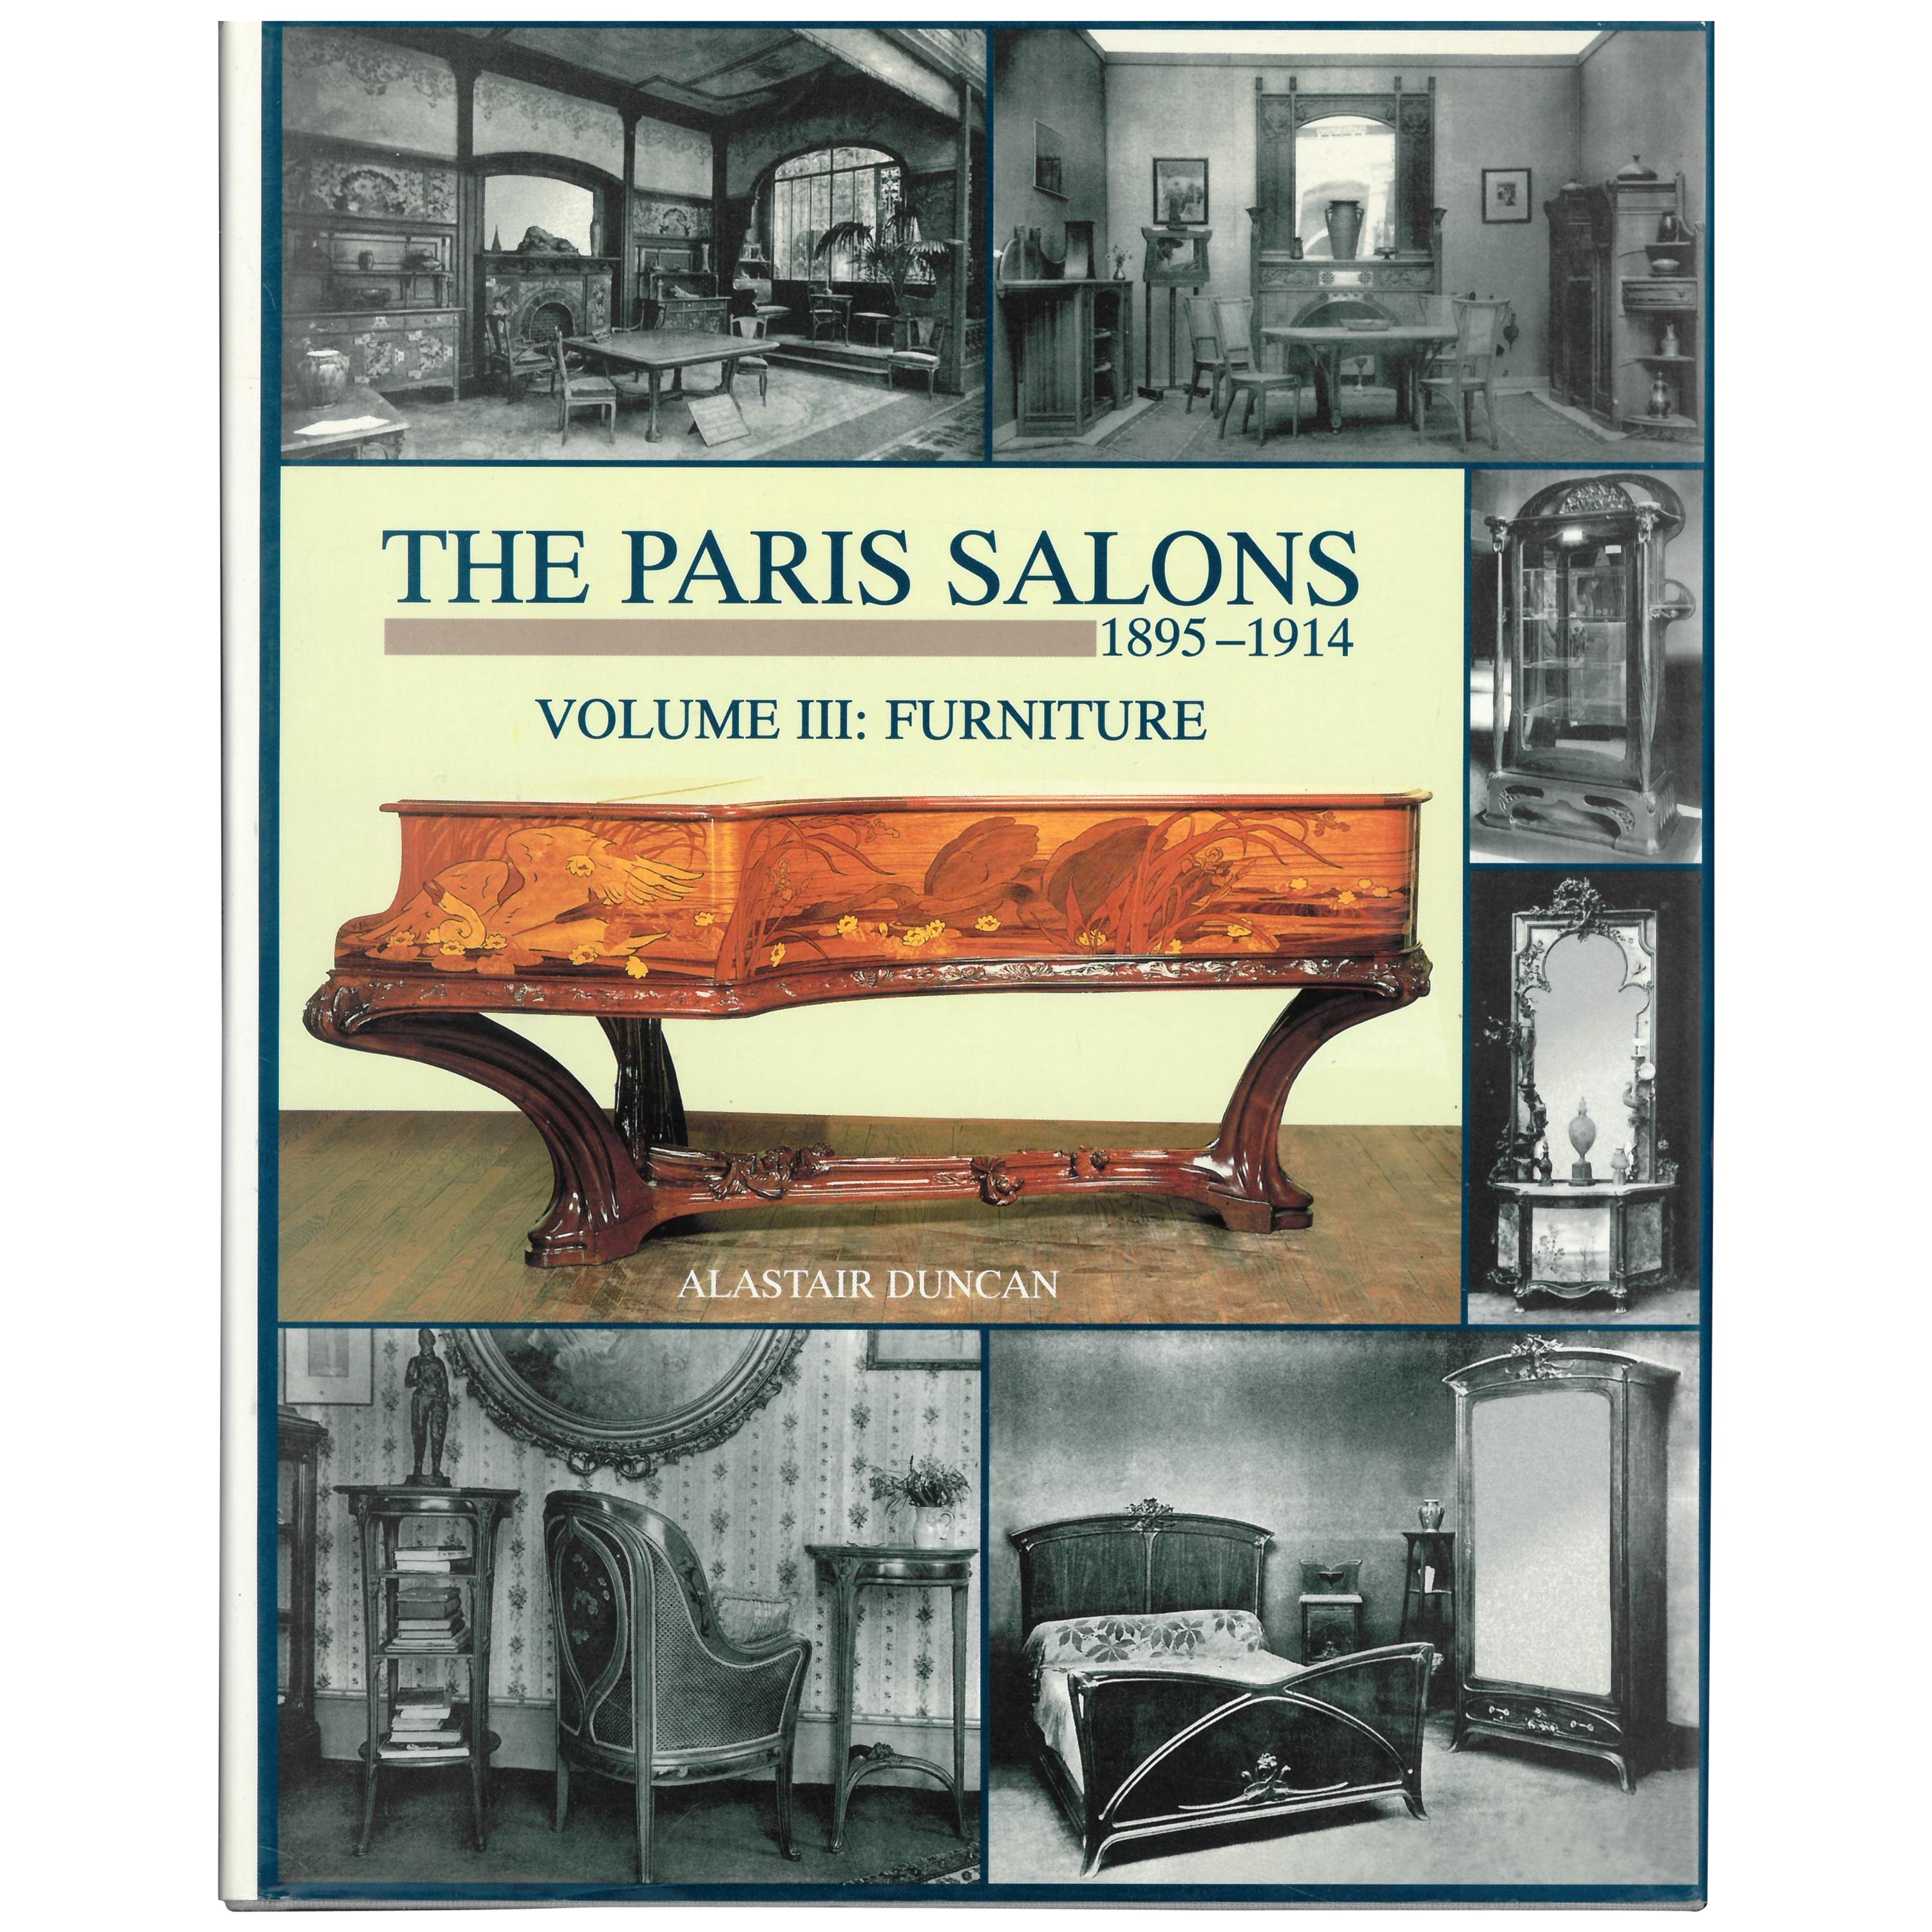 The Paris Salons 1895-1914 Volume III Furniture by Alastair Duncan (Book) For Sale